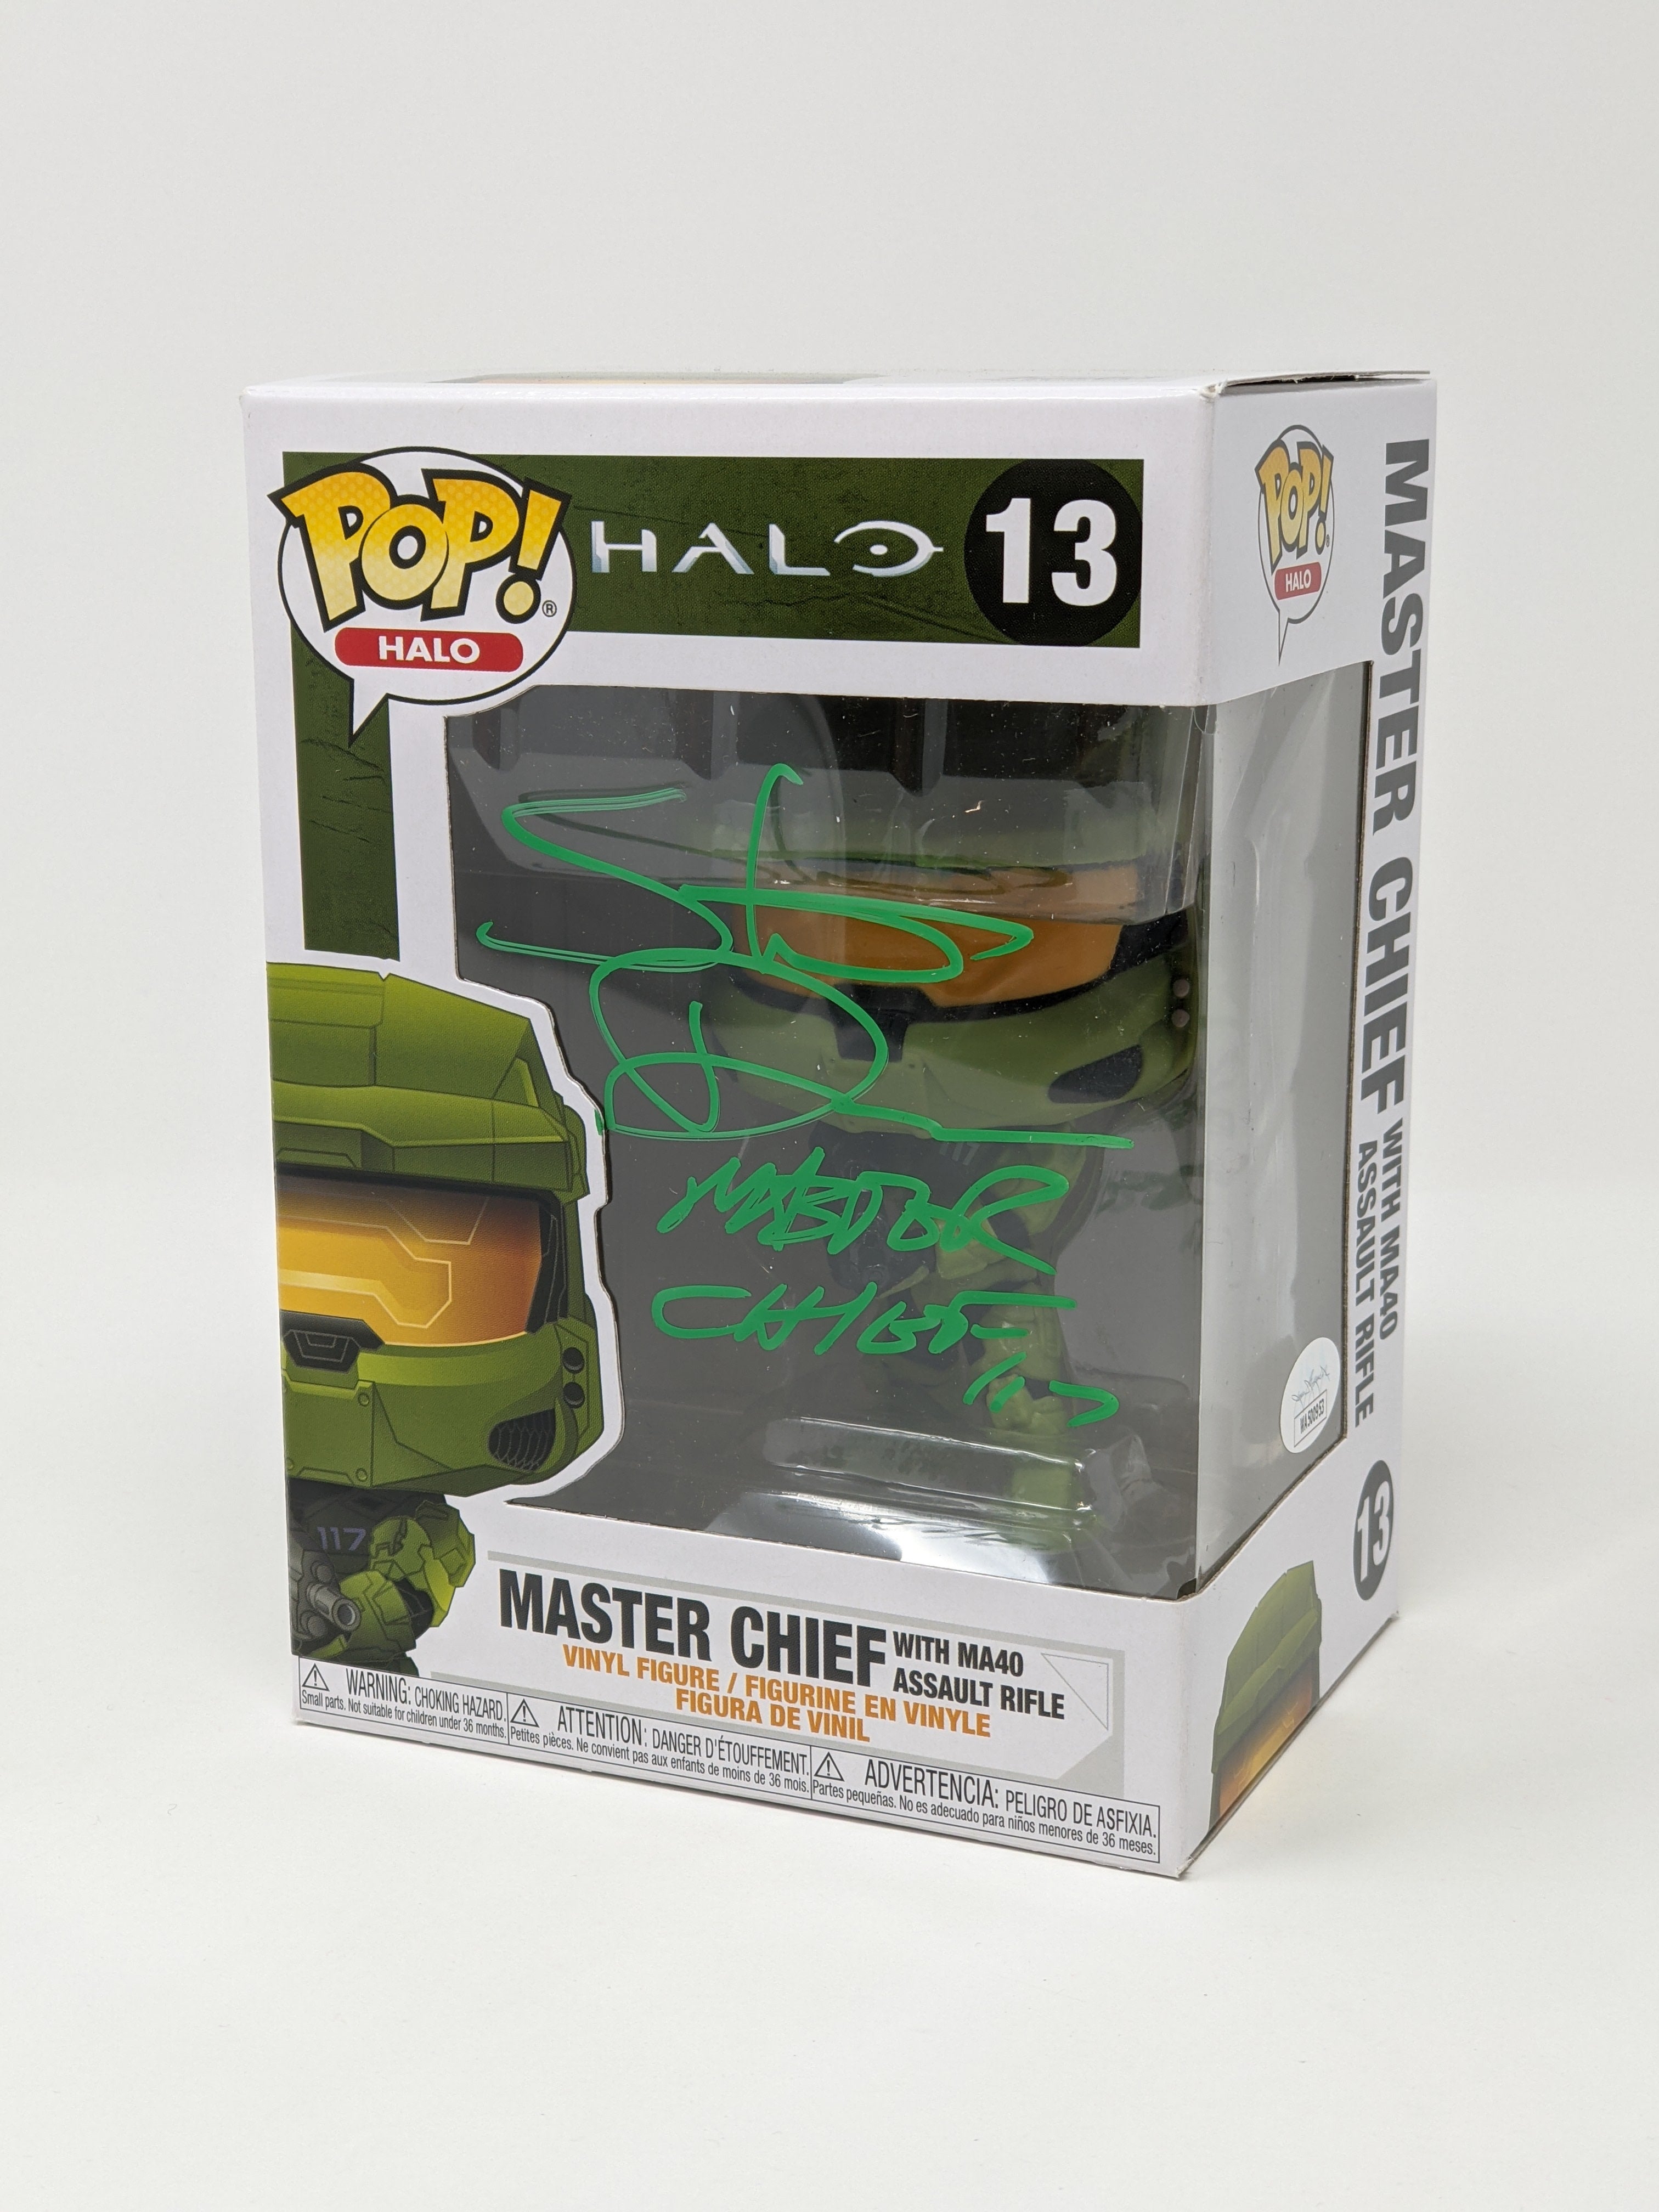 Steve Downes Halo Master Chief MA40 Assault Rifle #13 Signed Funko Pop JSA Certified Autograph